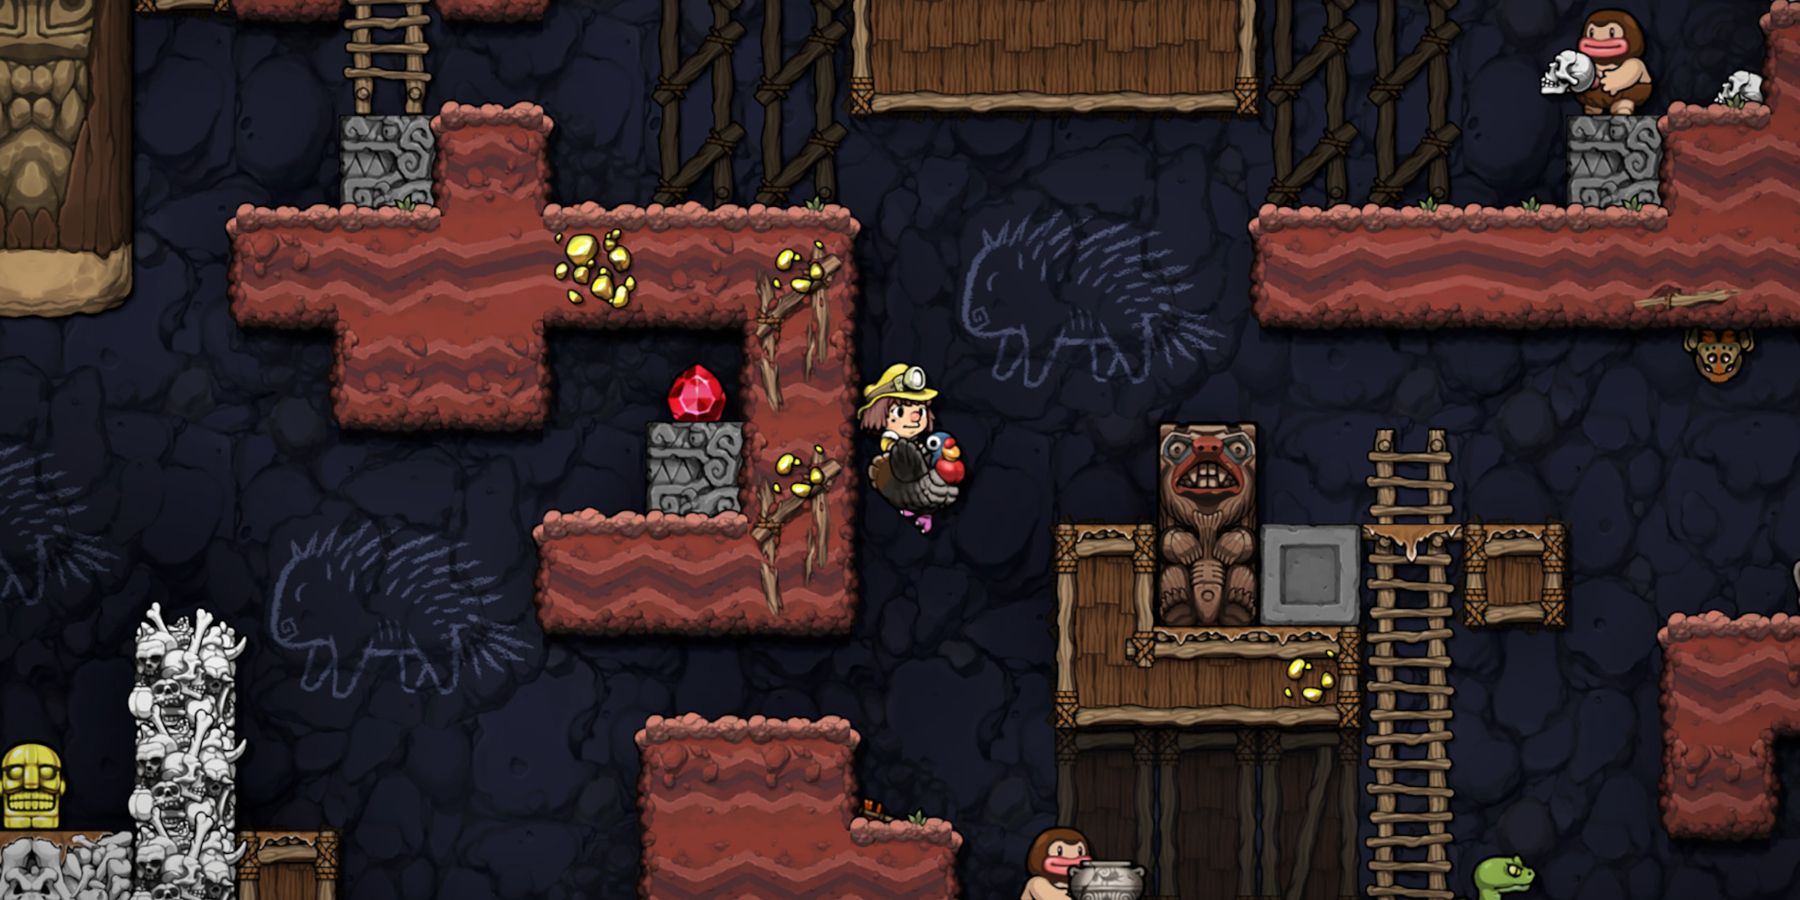 A level in Spelunky 2